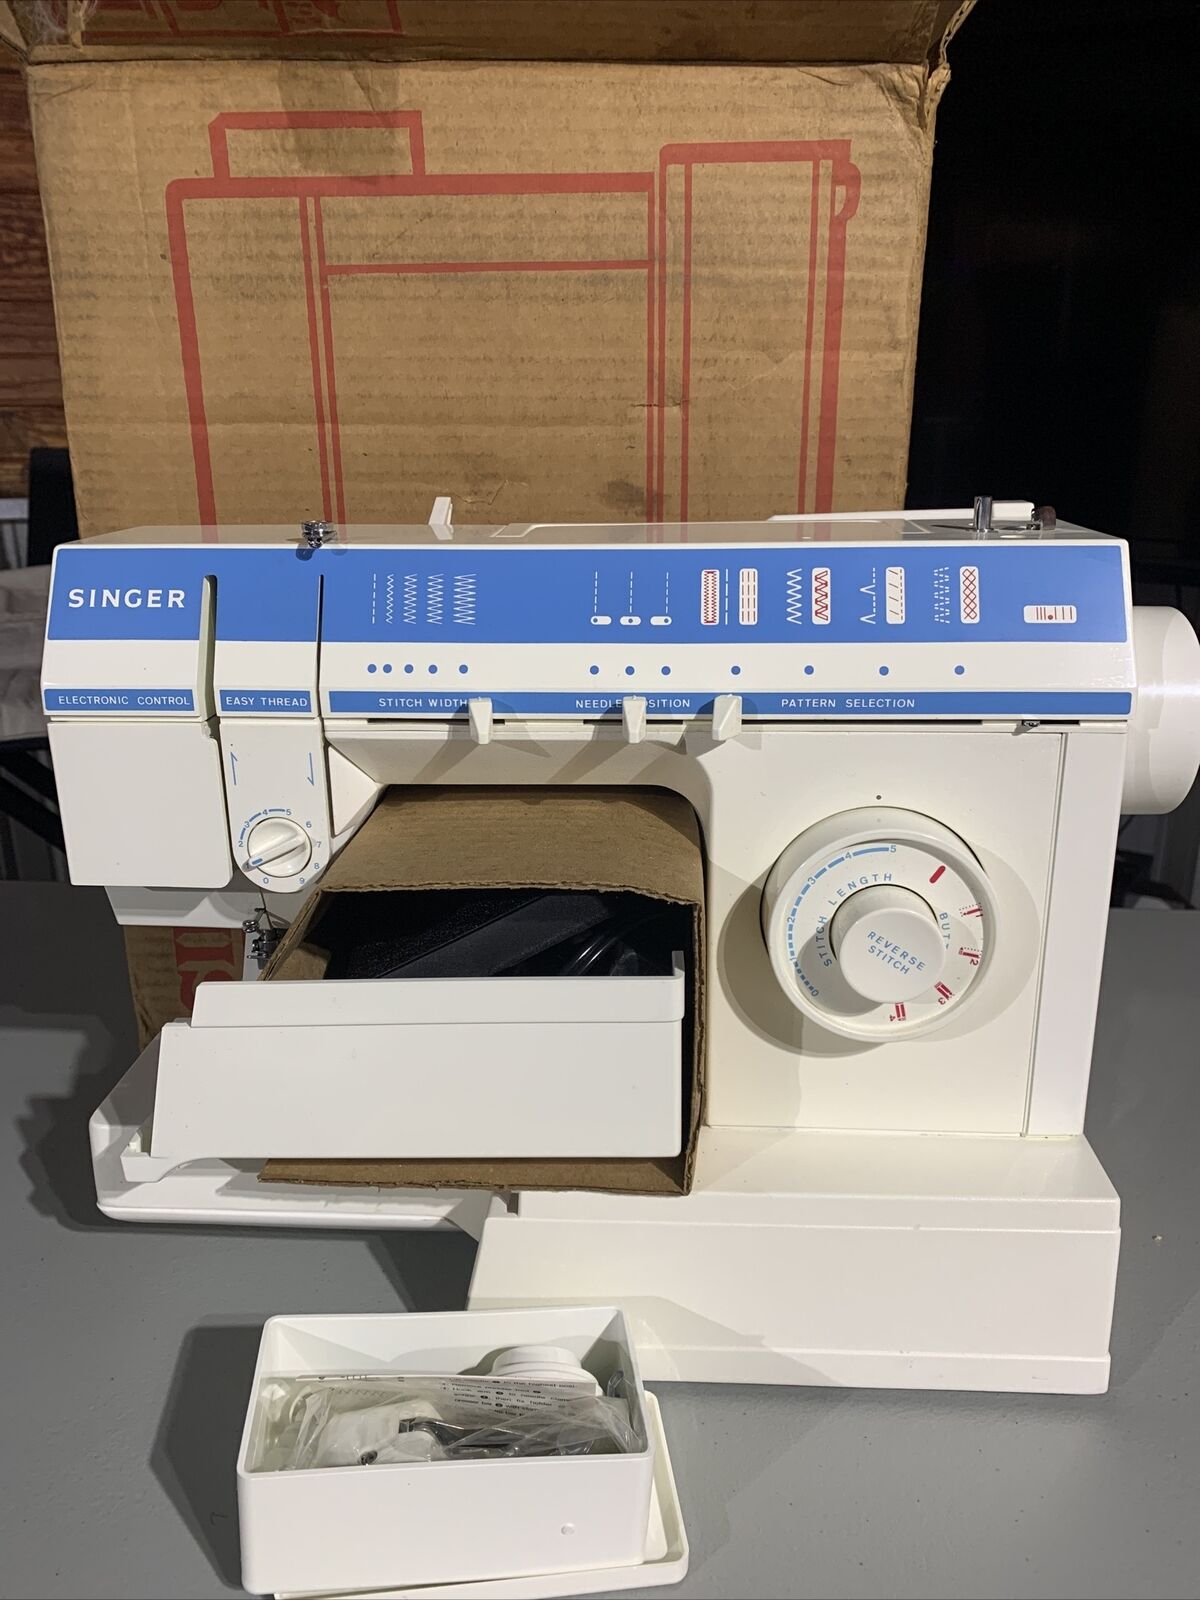 Singer Sewing Machine 4620 C Comes With Every Thing Needed Pedal And Acc.